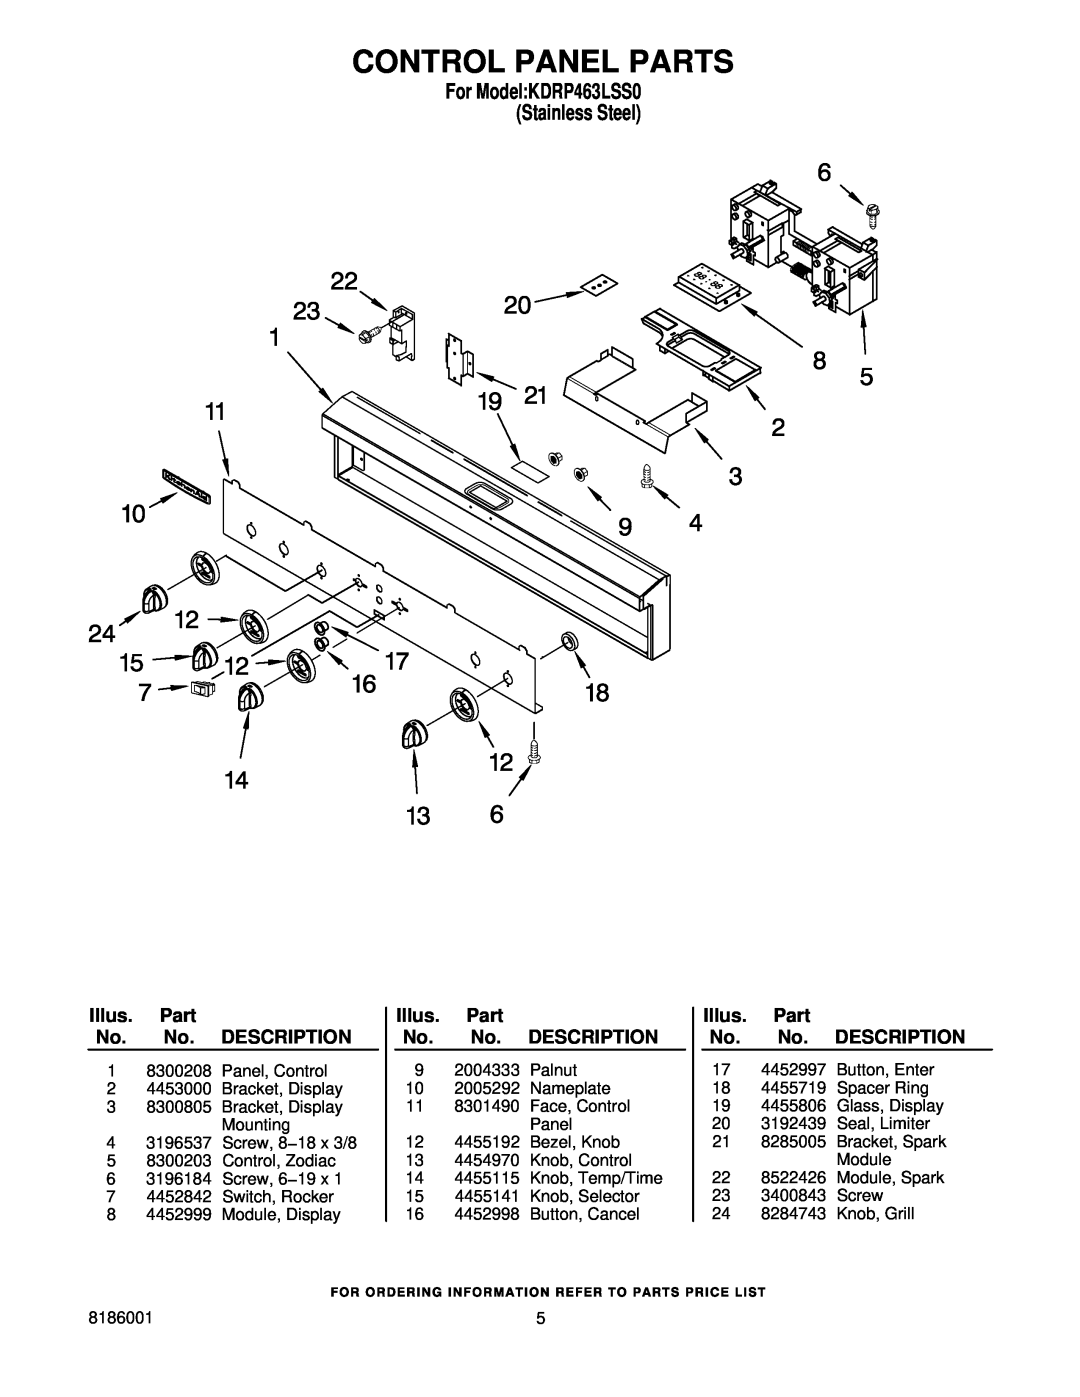 KitchenAid manual Control Panel Parts, For ModelKDRP463LSS0 Stainless Steel, Illus. Part No. No. DESCRIPTION 